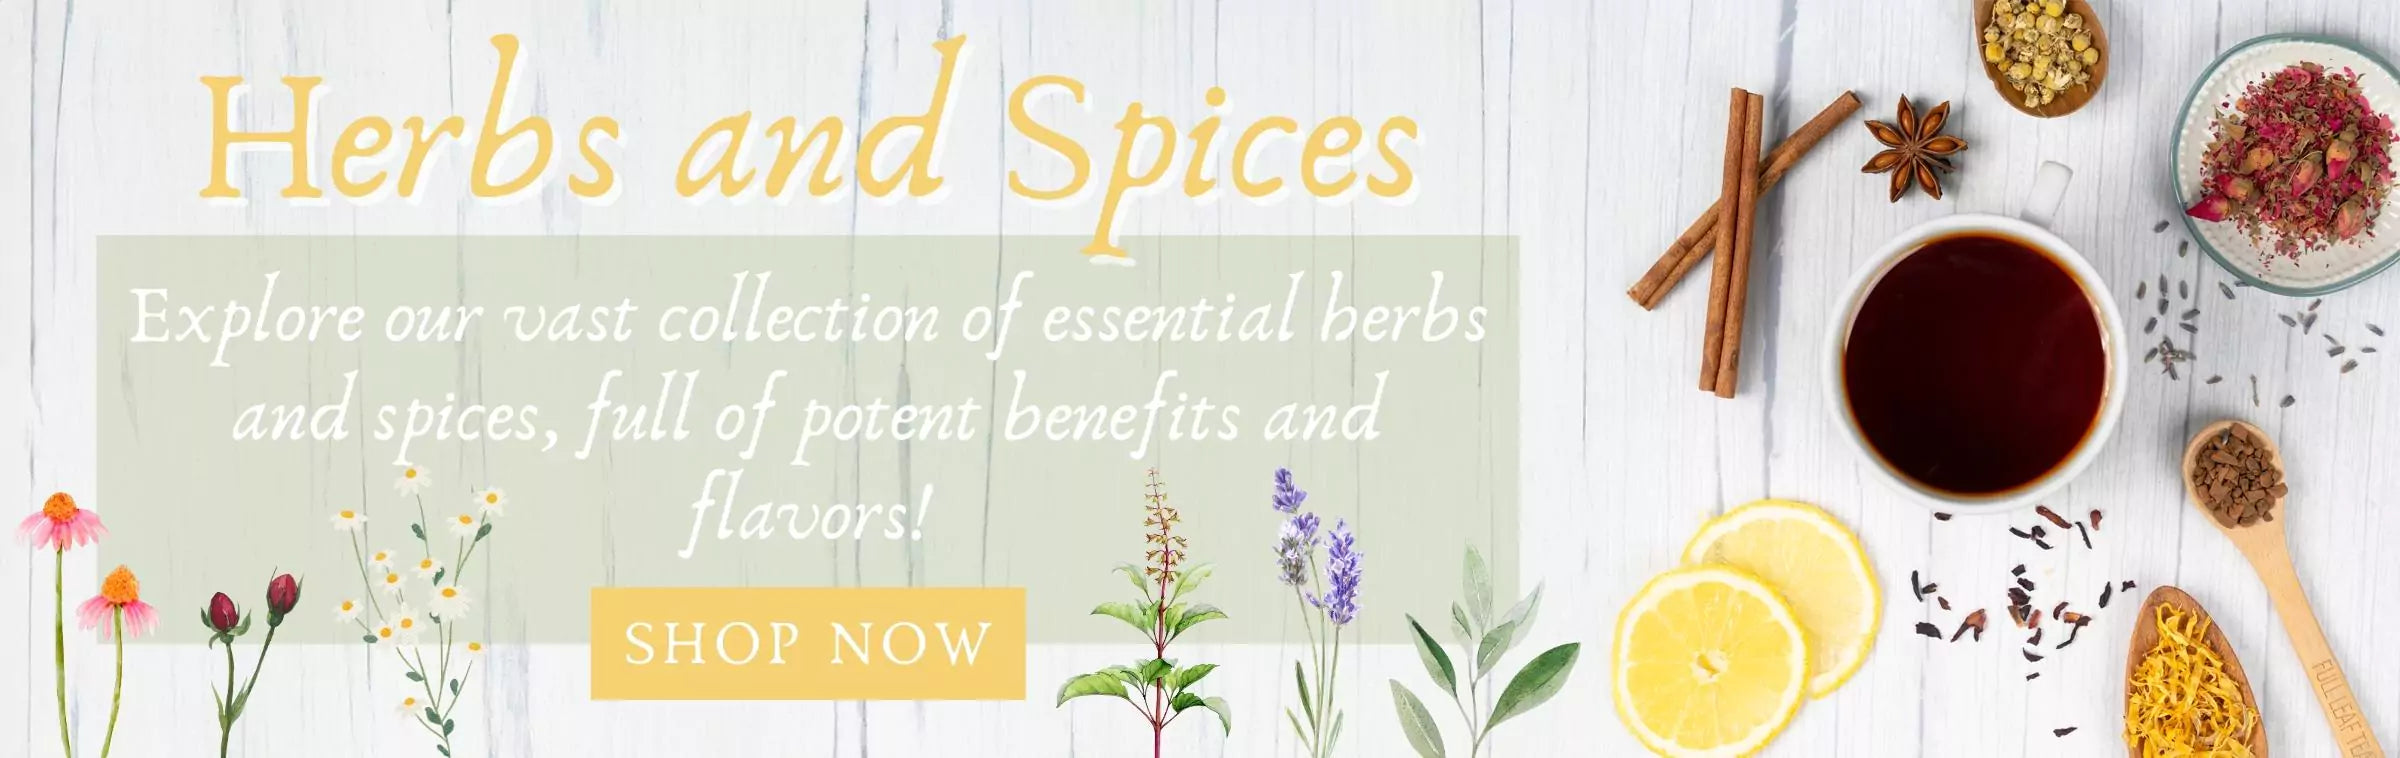 Herbs spices web